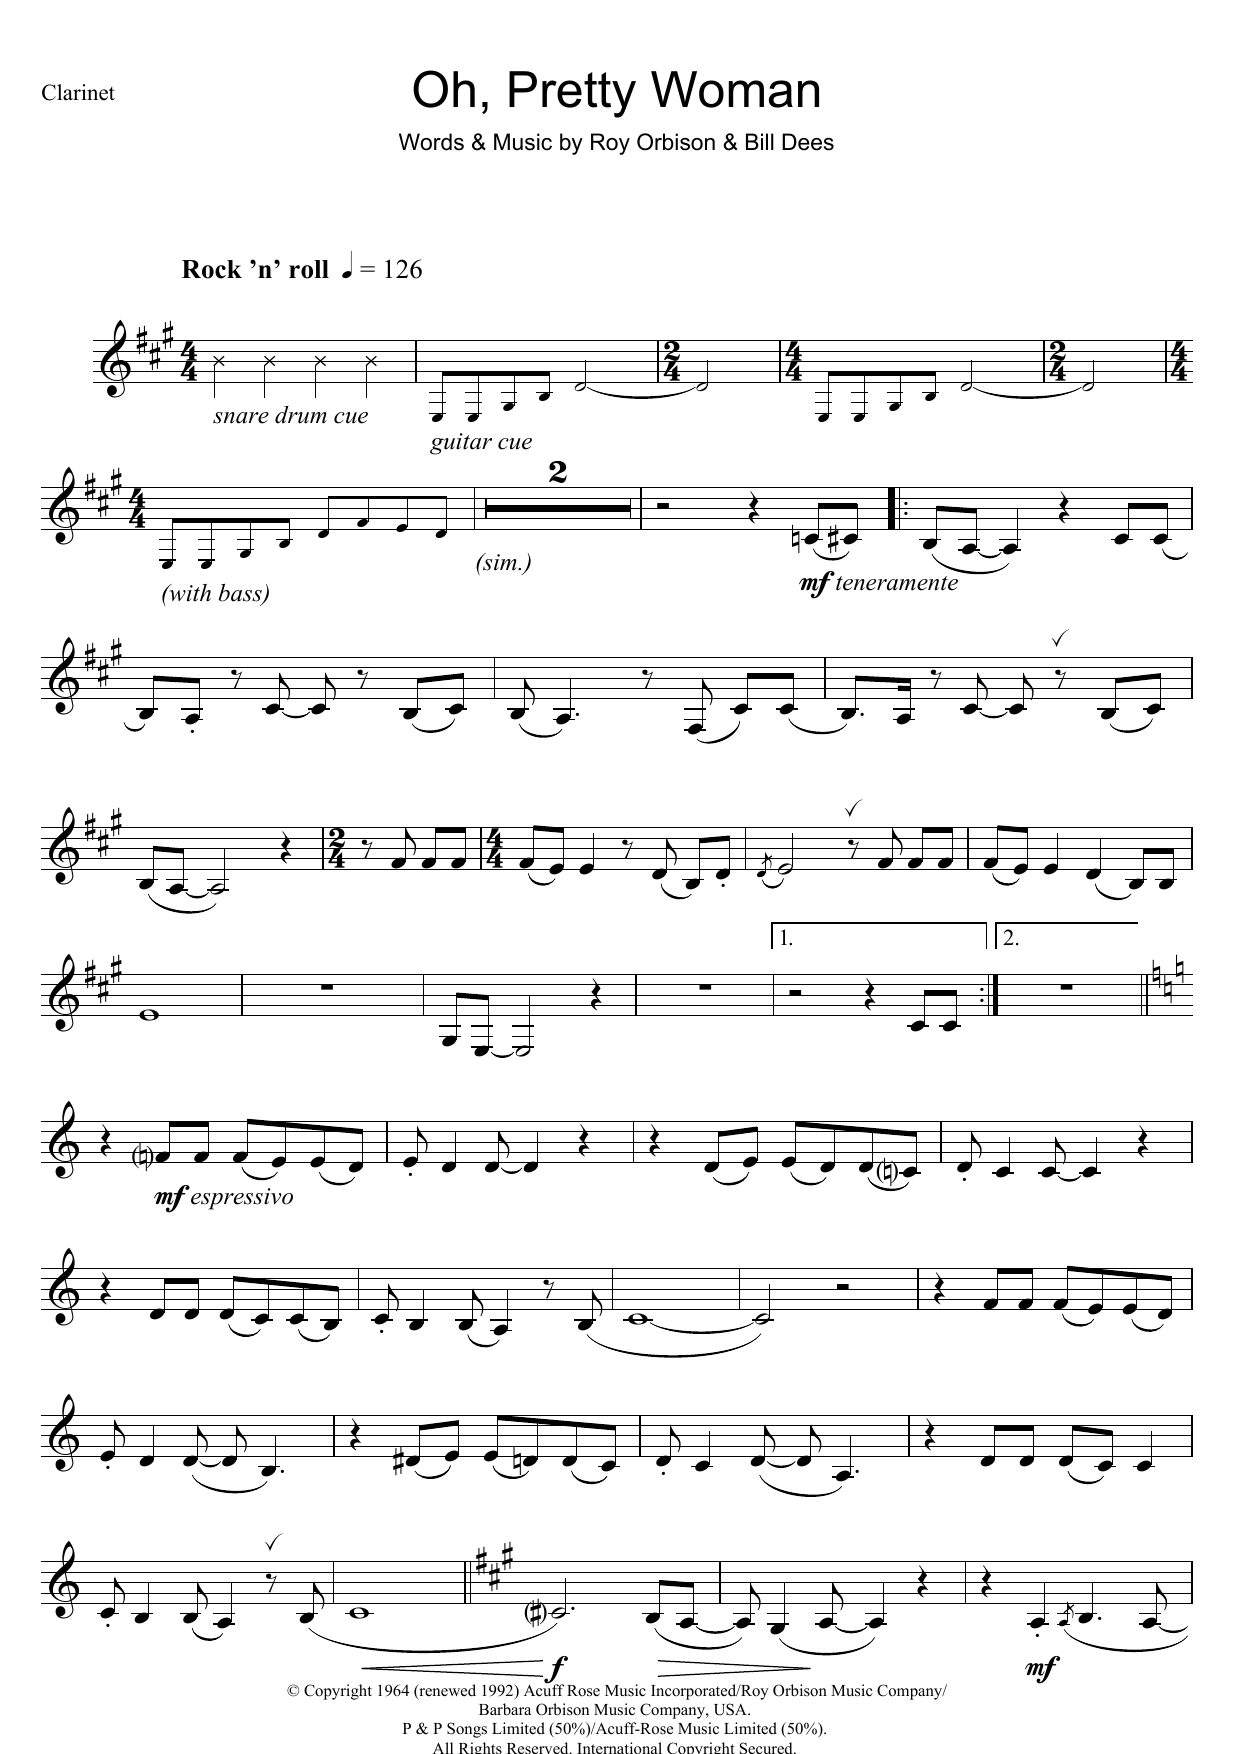 Download Roy Orbison Oh, Pretty Woman Sheet Music